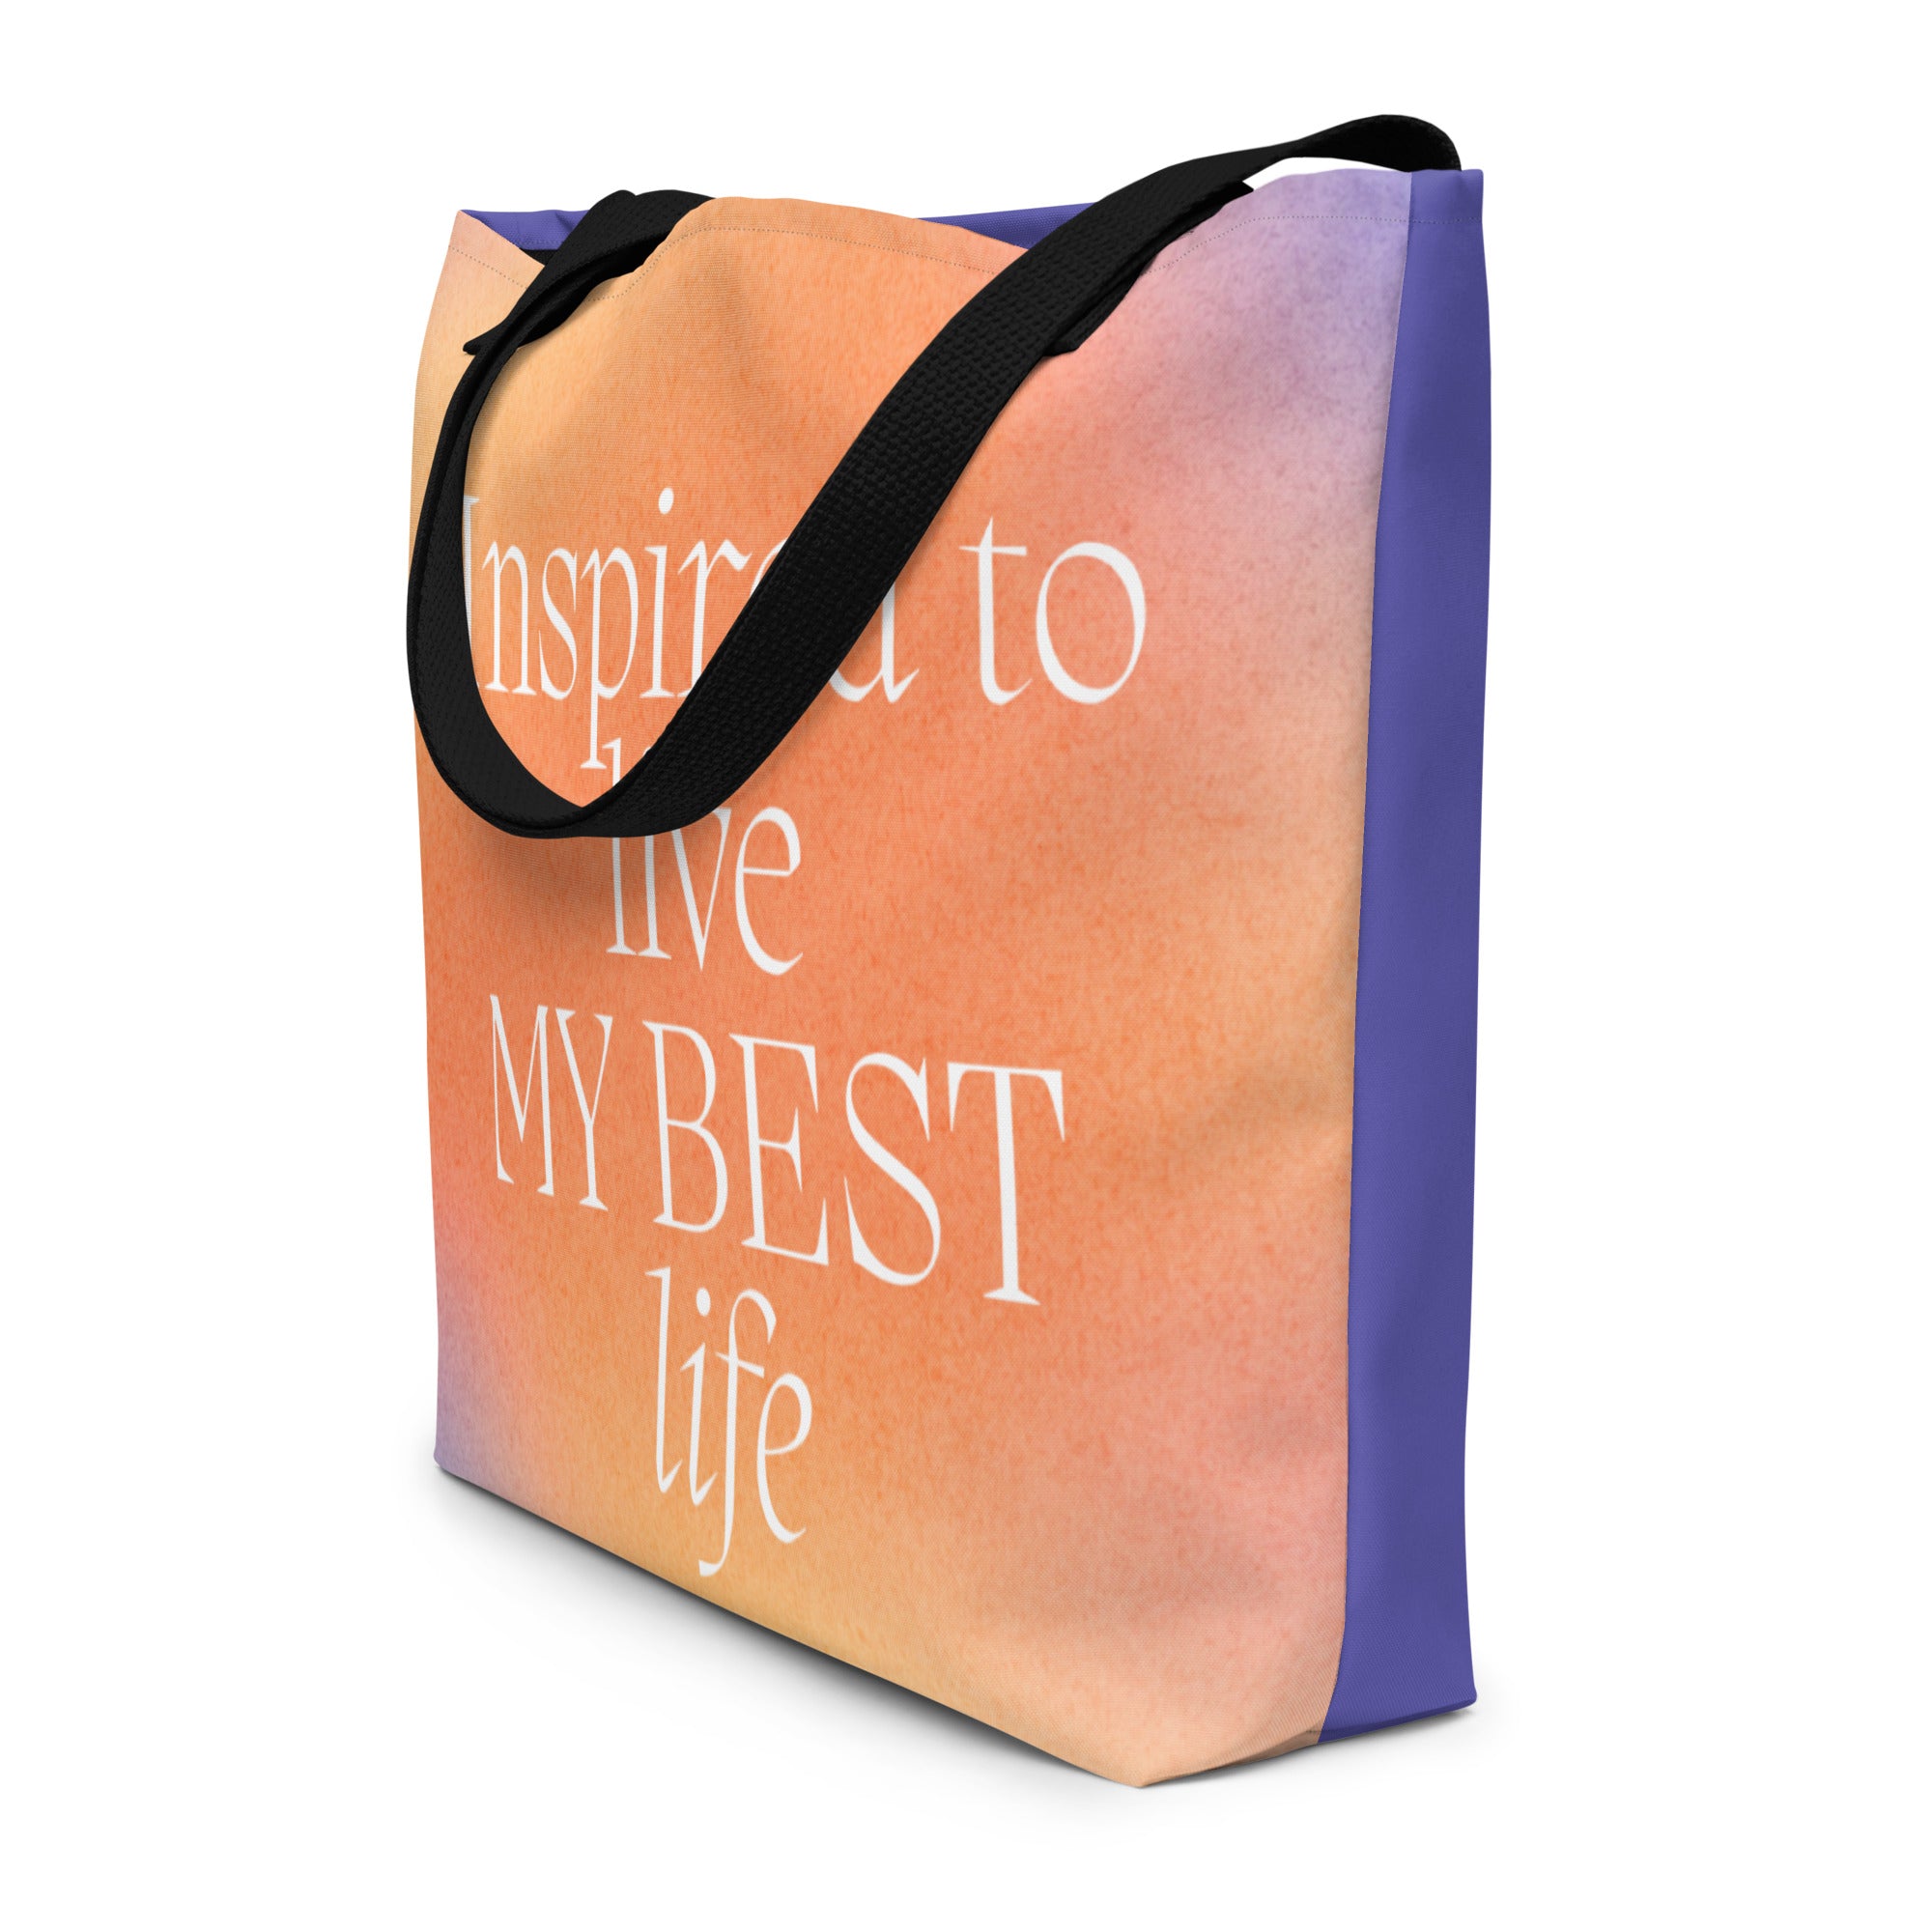 Inspired to live my best life large tote bag